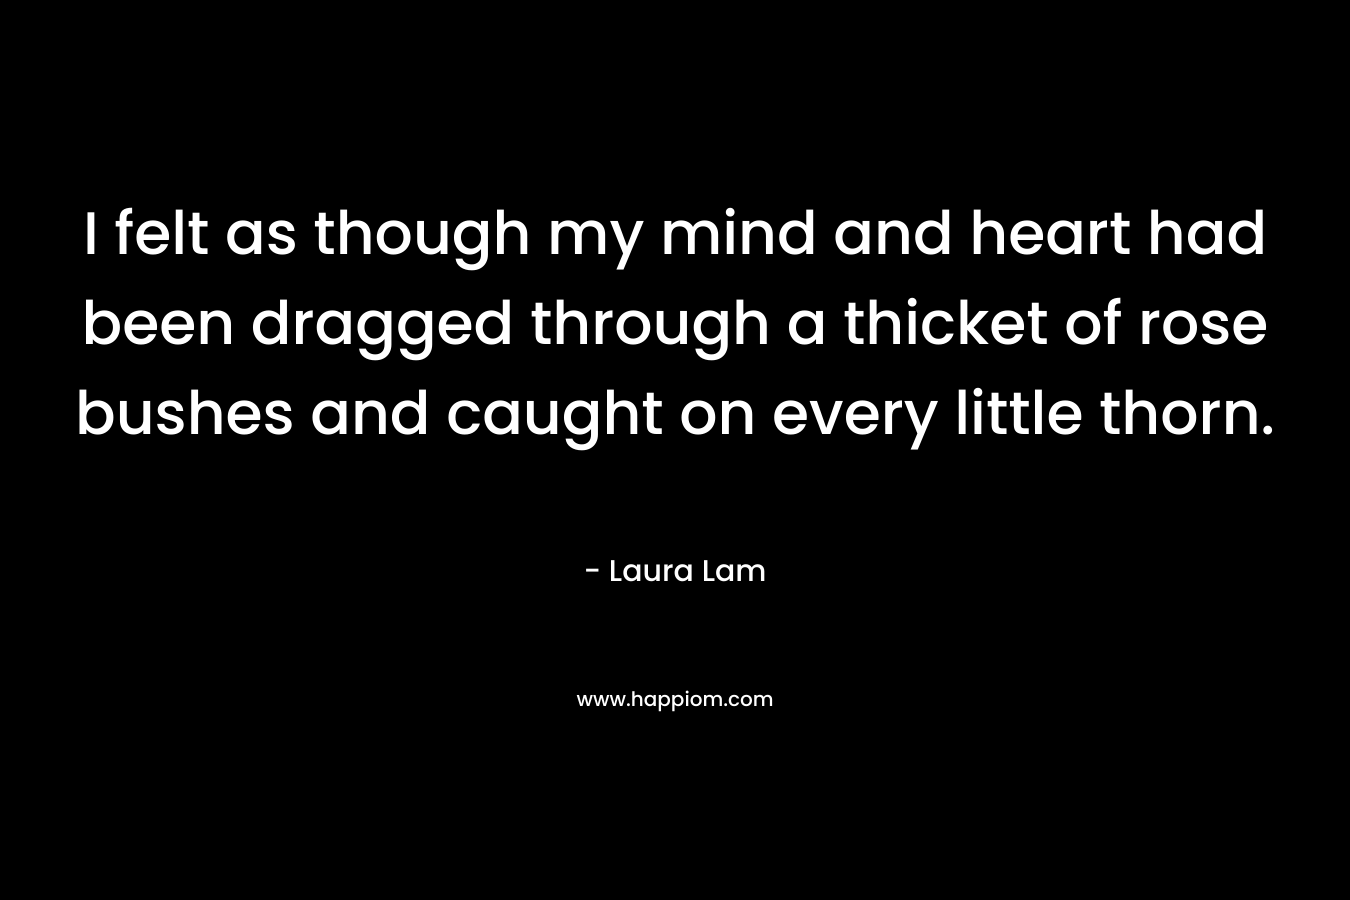 I felt as though my mind and heart had been dragged through a thicket of rose bushes and caught on every little thorn. – Laura Lam